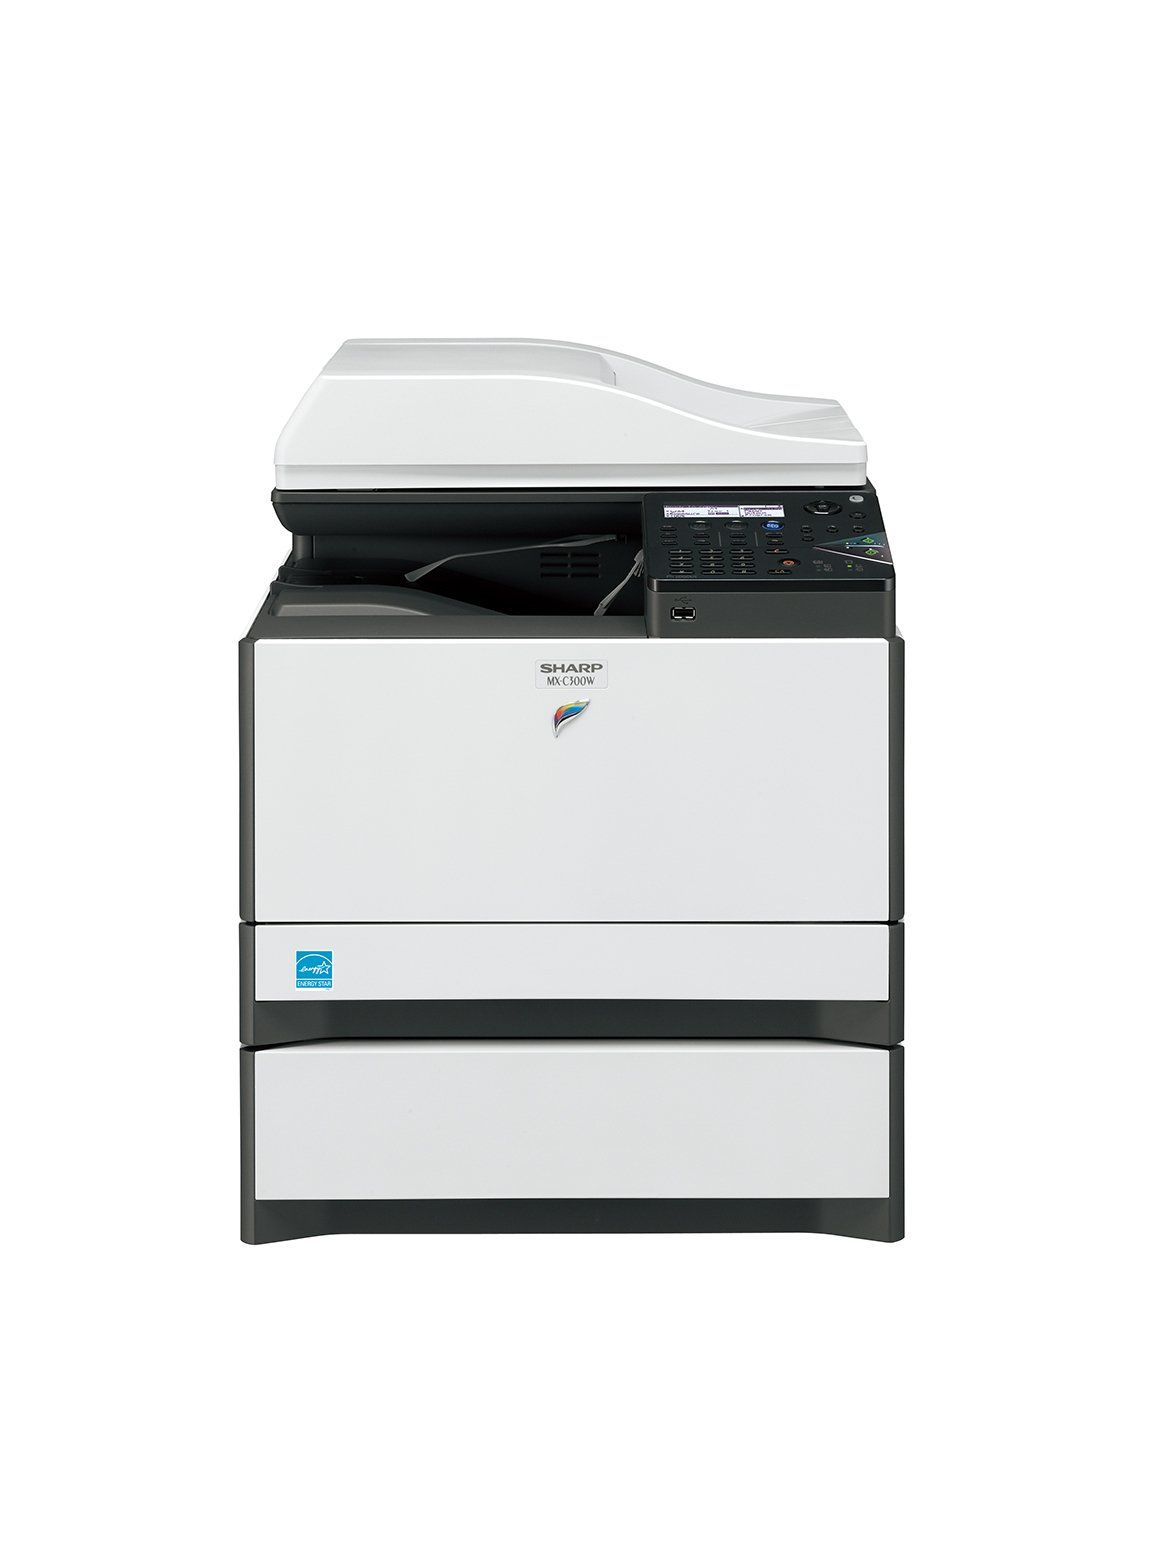 Small copier for your small office or home use. Rent it on Month-to-month basis.